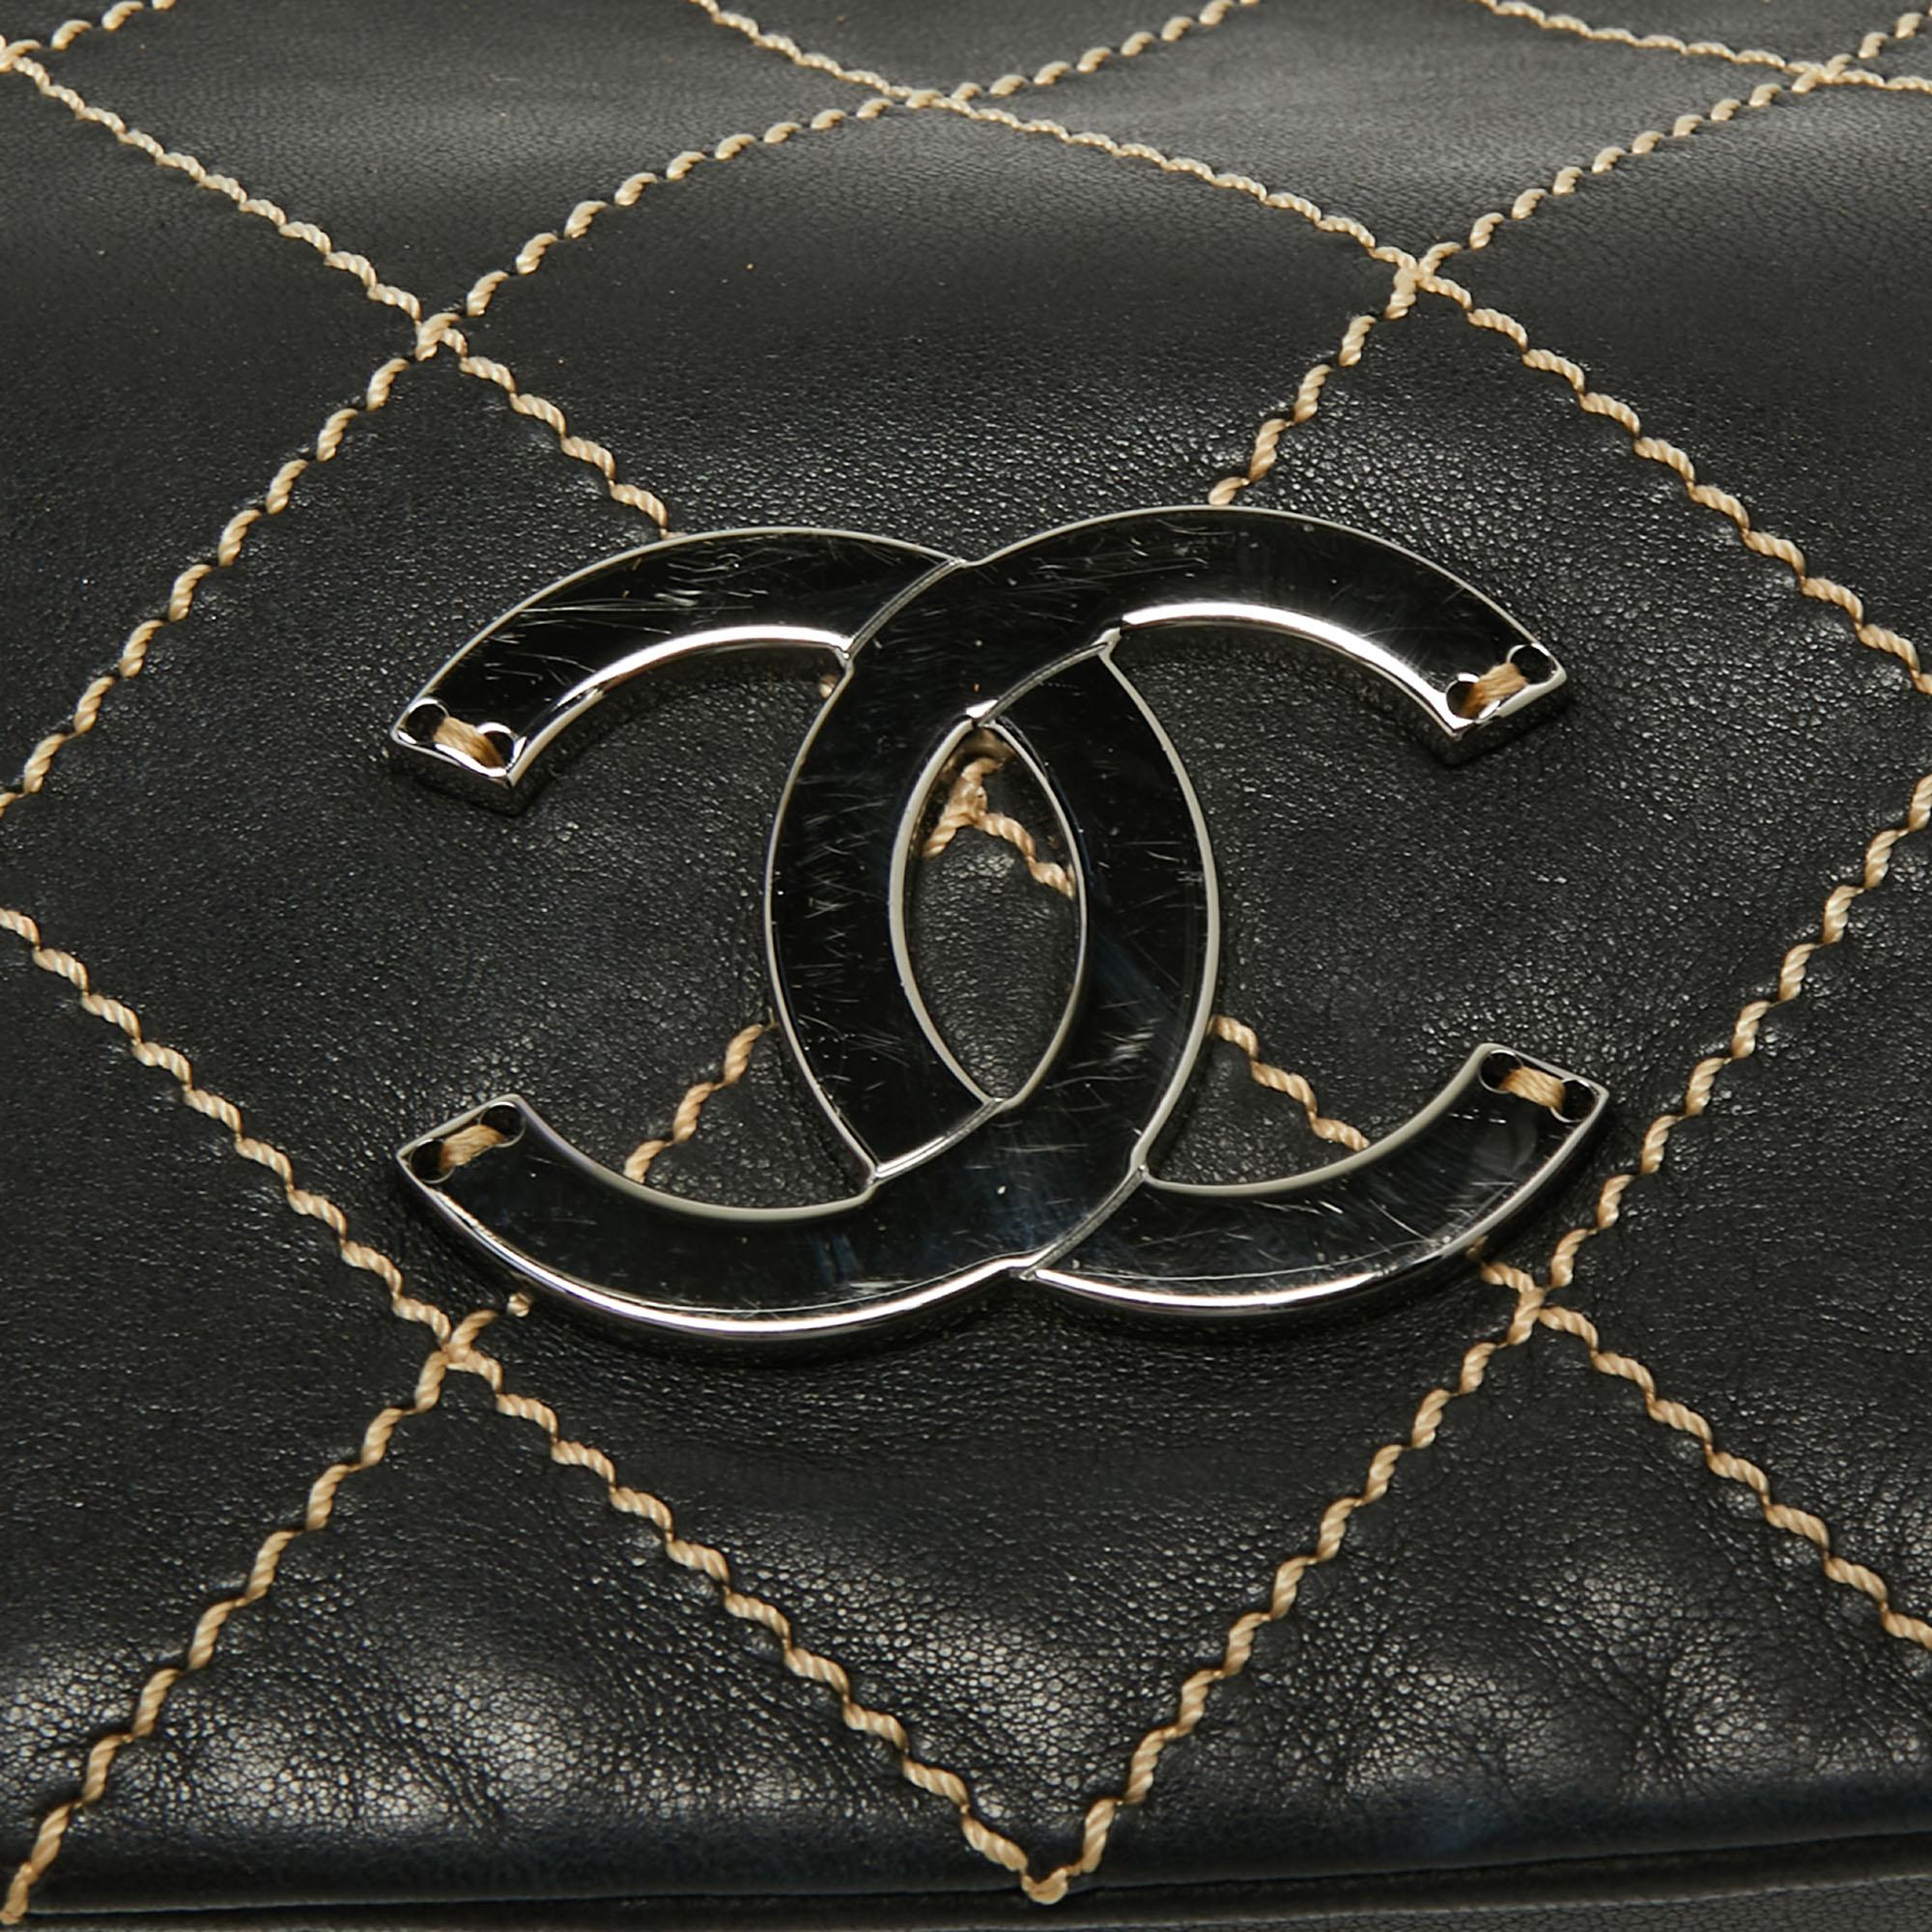 Chanel Black Quilted Leather Wild Stitch Accordion Shoulder Bag 2